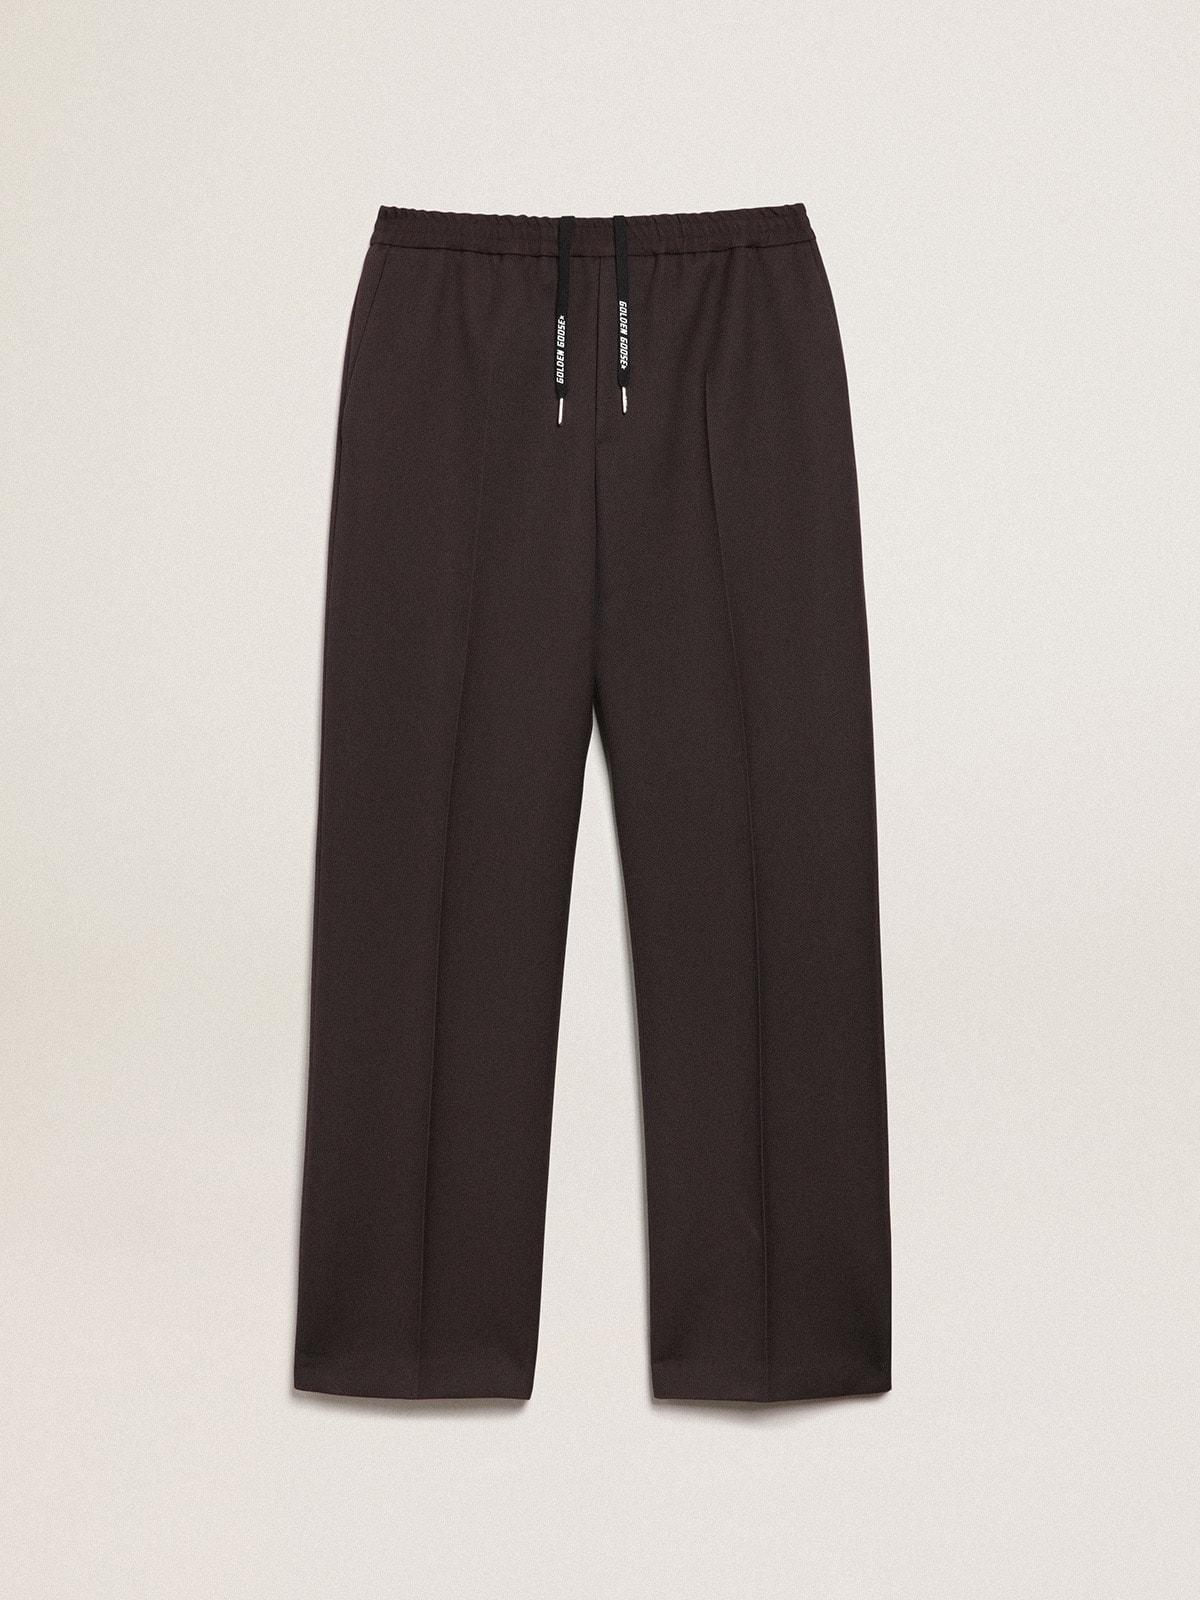 Licorice-colored Journey Collection wide-leg jogging pants